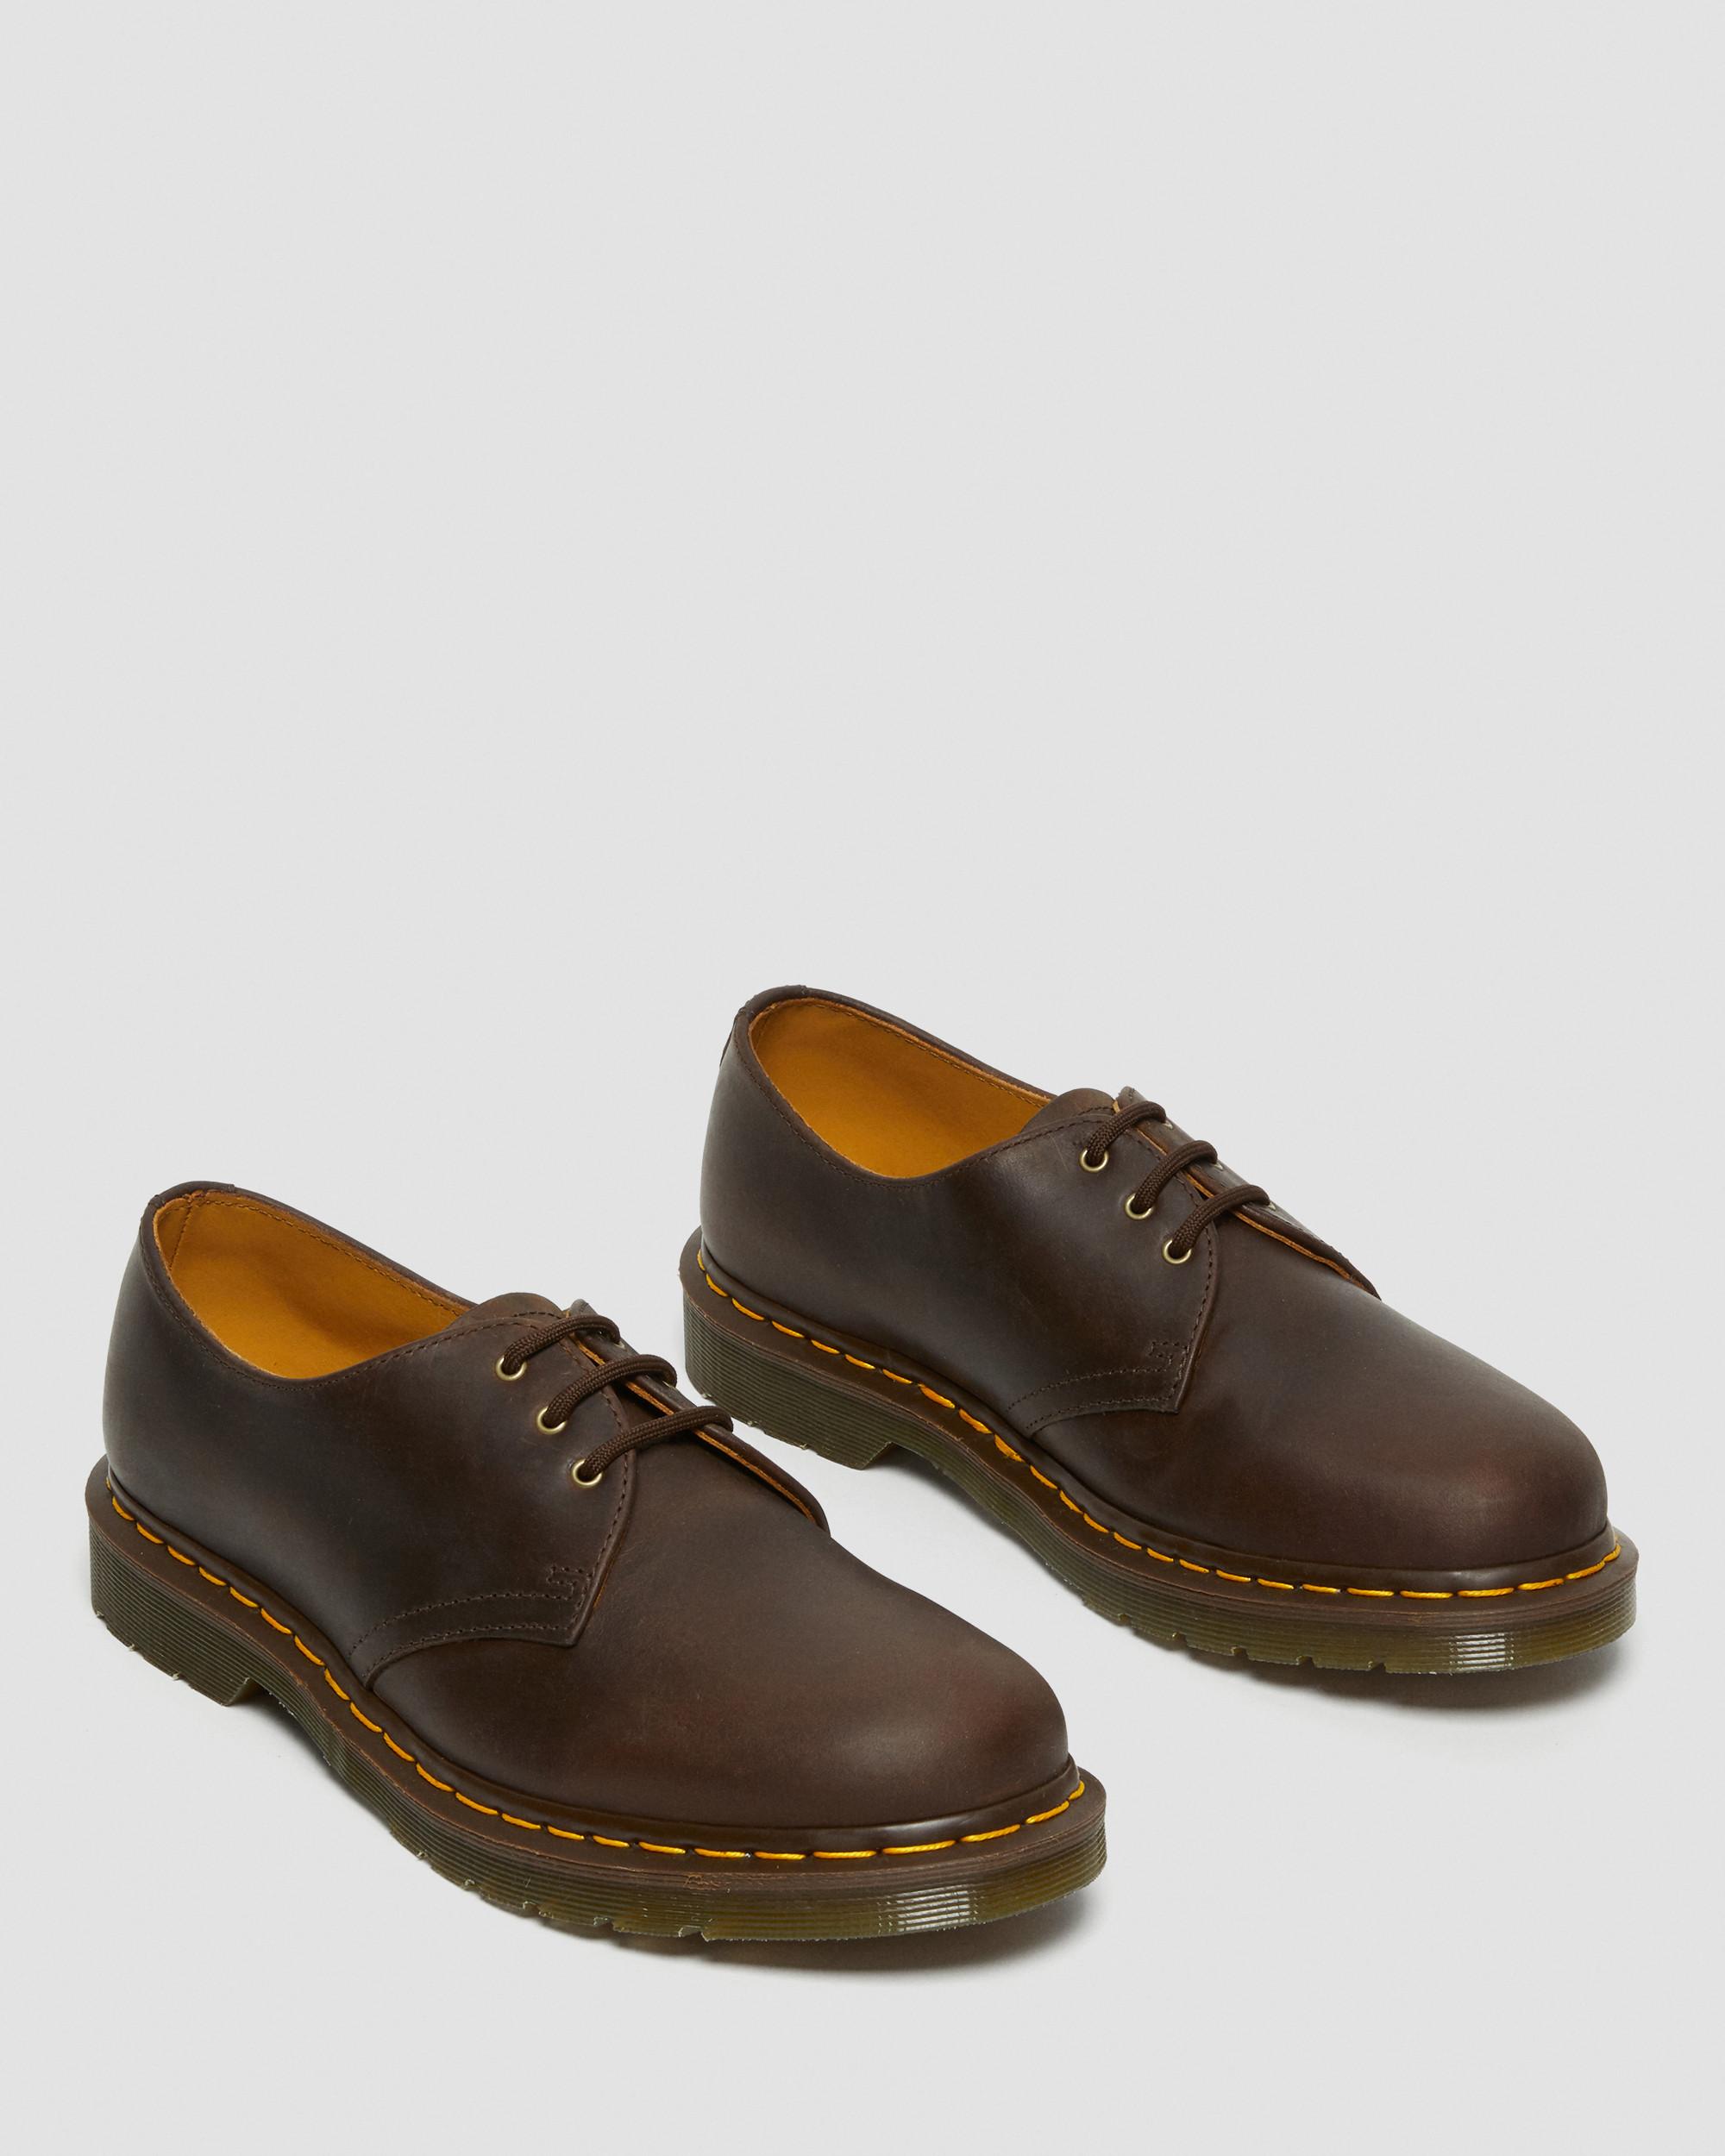 1461 Crazy Horse Leather Oxford Shoes | Dr. Martens